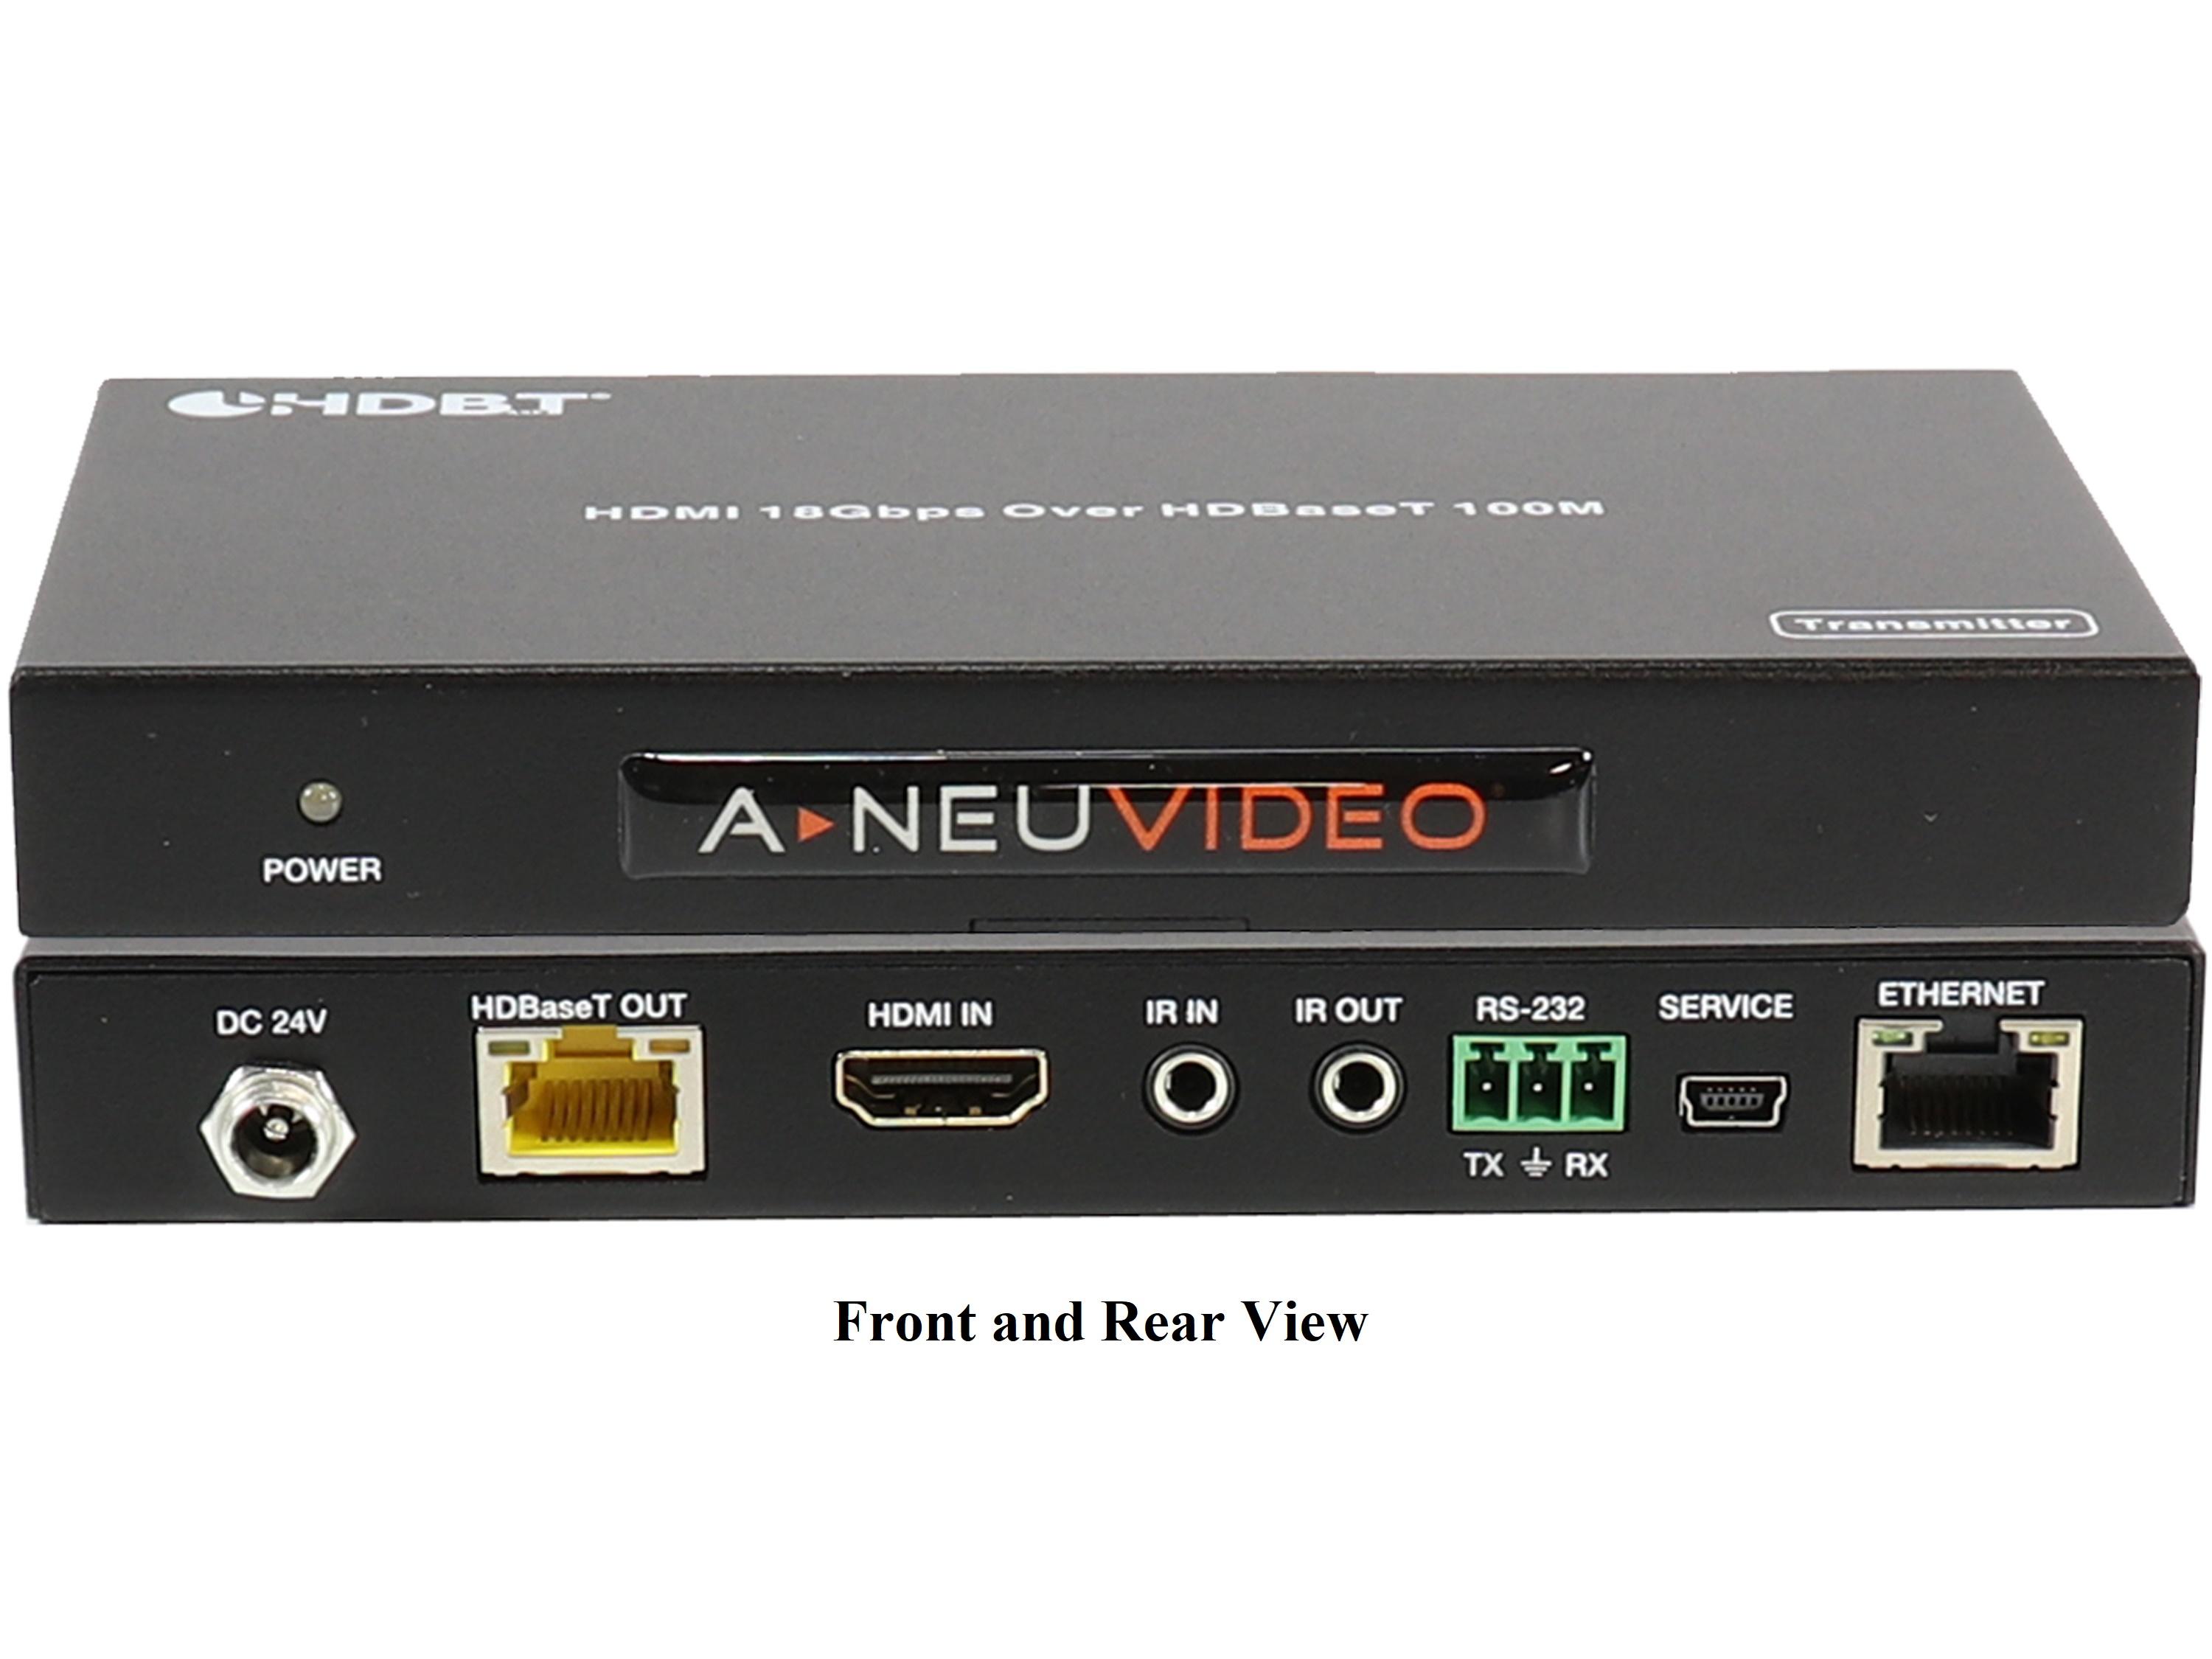 ANI-HDR-100 HDMI 4K PoH Extender (Transmitter/Receiver) over Cat5e/6 by A-NeuVideo